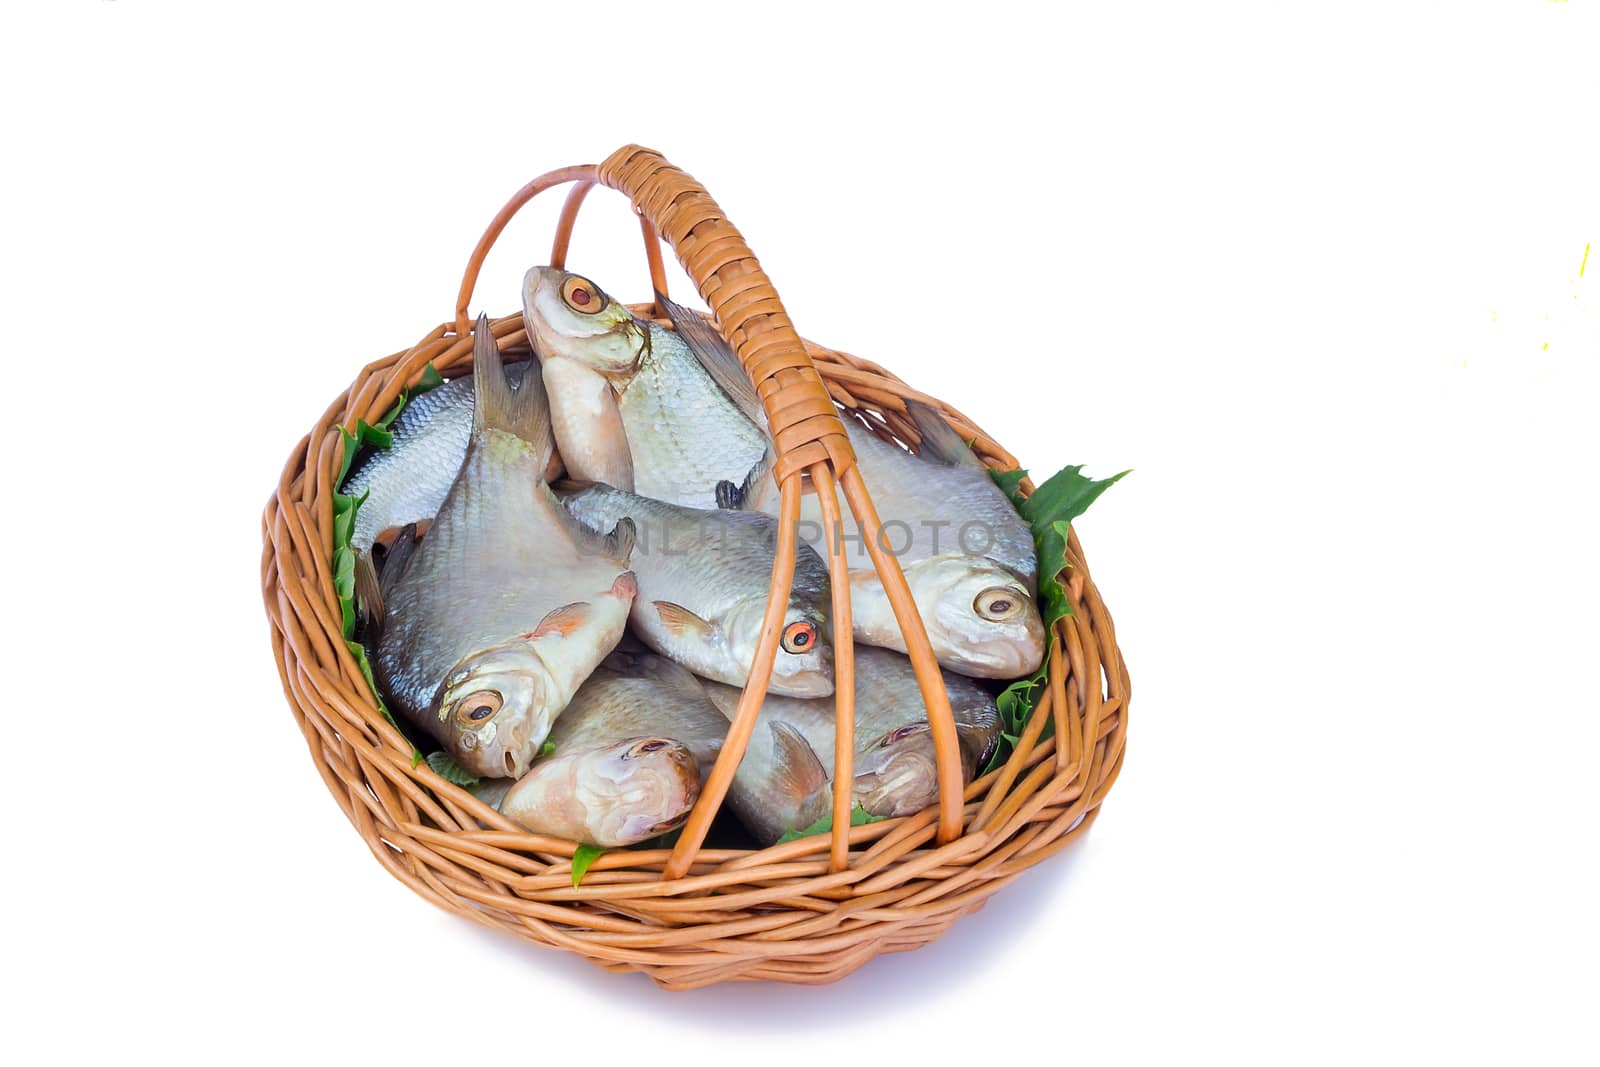 In a small wattled basket there is fish hooked in the river.
It is presented on a white background.